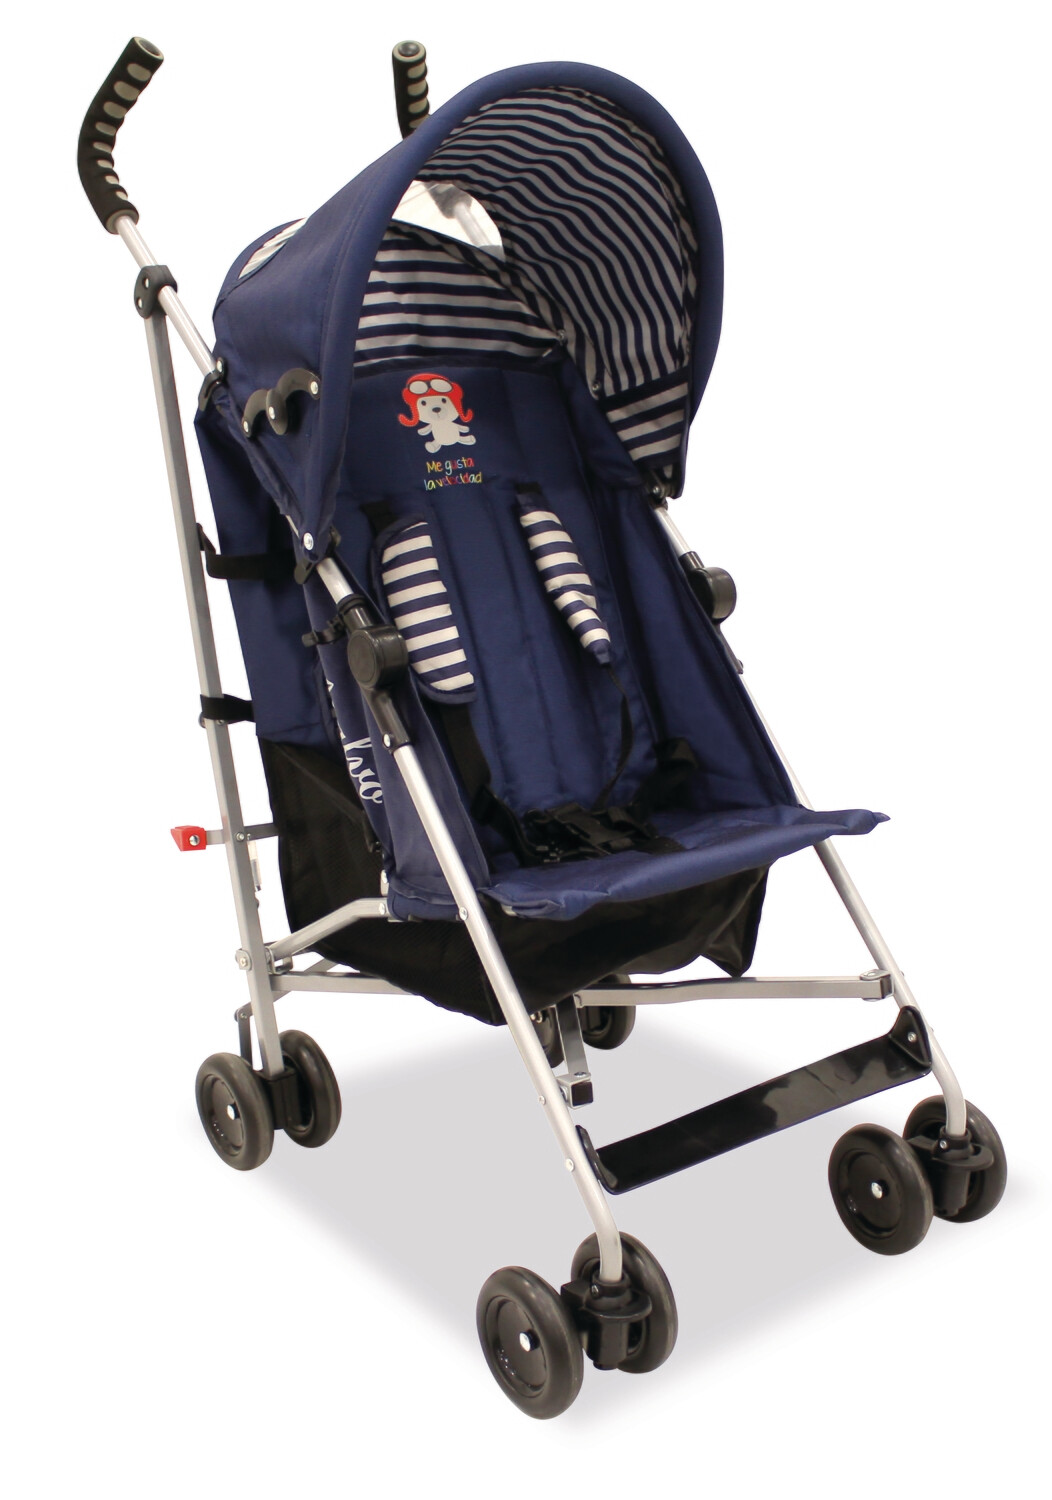 Yolo Stroller for Babies